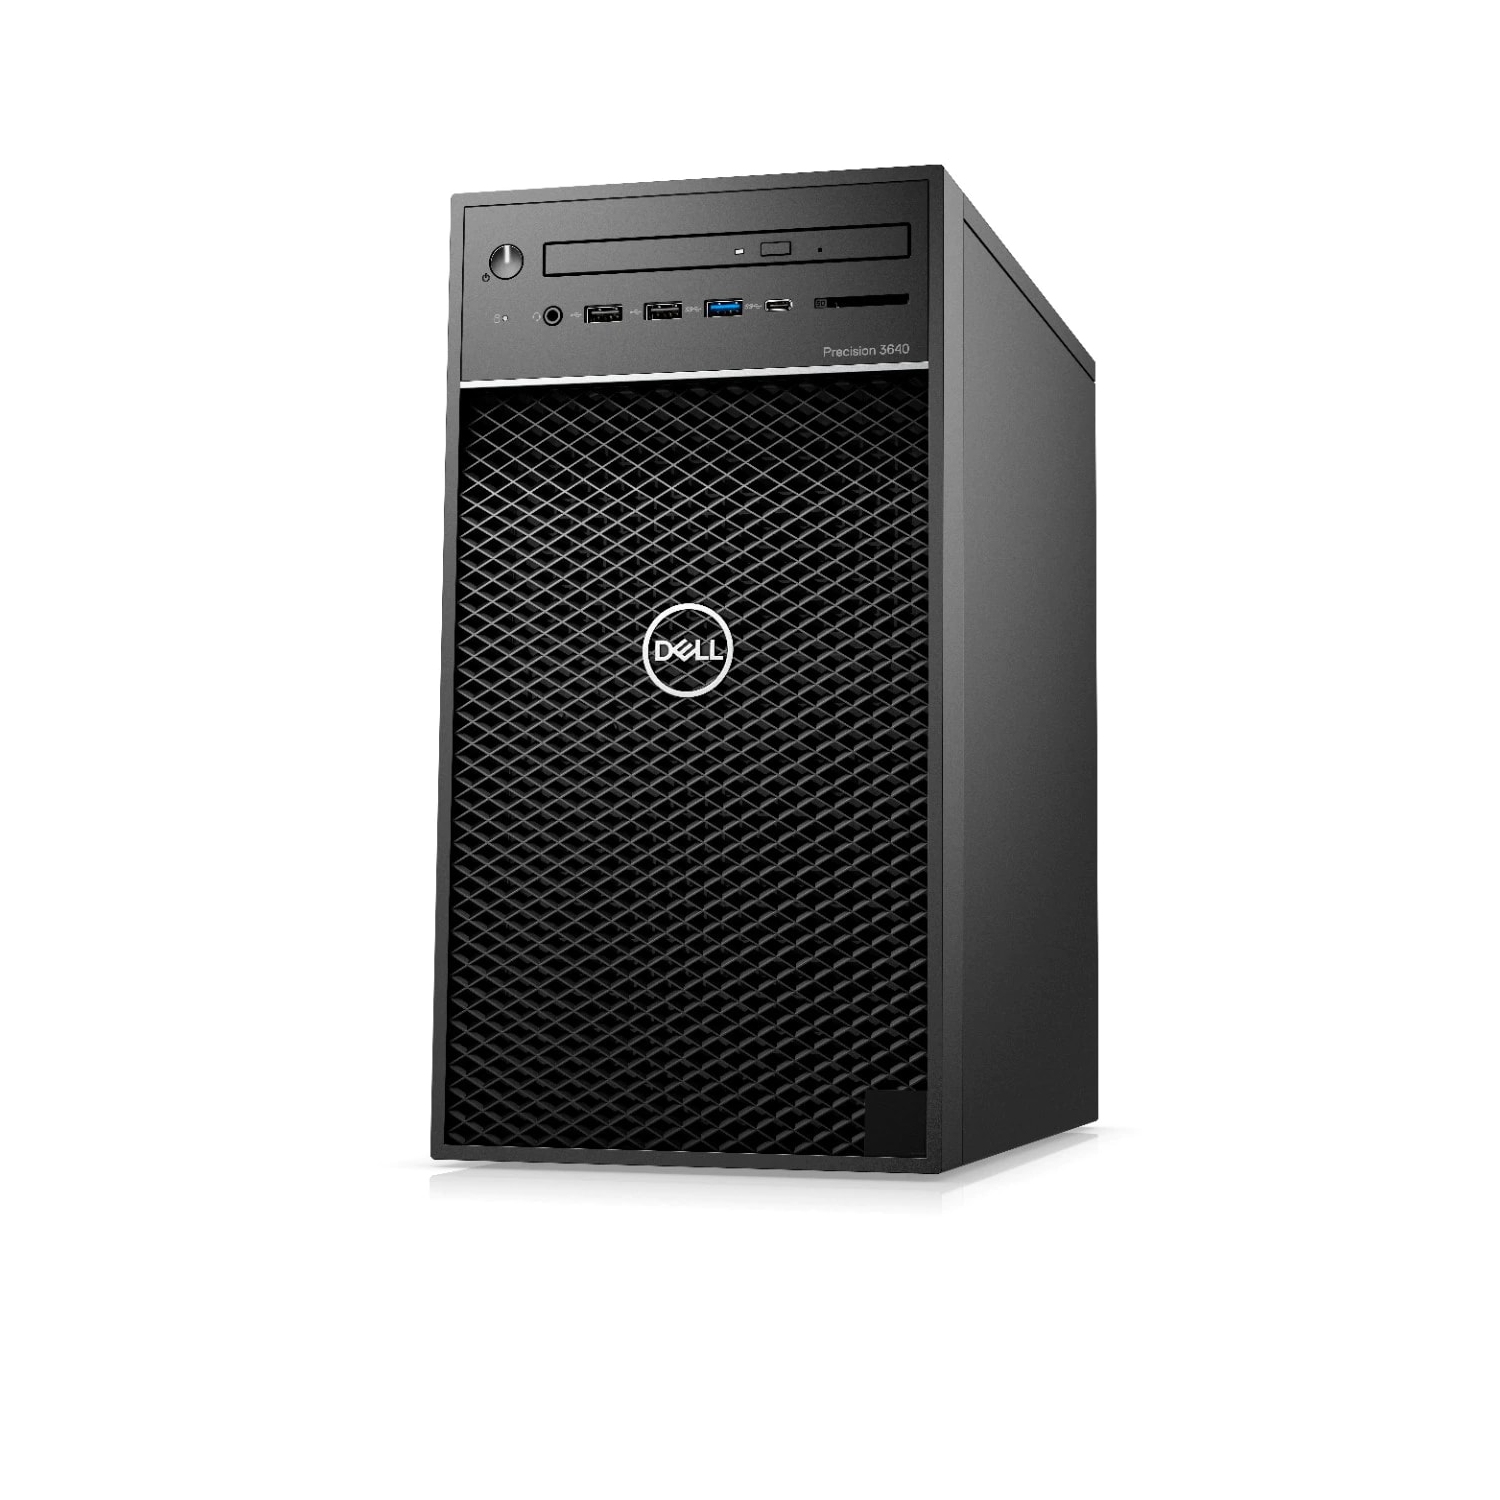 Refurbished (Excellent) - Dell Precision T3640 Workstation Desktop (2018), Core i7, 512GB SSD, 32GB RAM, RTX 3080, 8 Cores @ 4.8 GHz, 10th Gen CPU Certified Refurbished